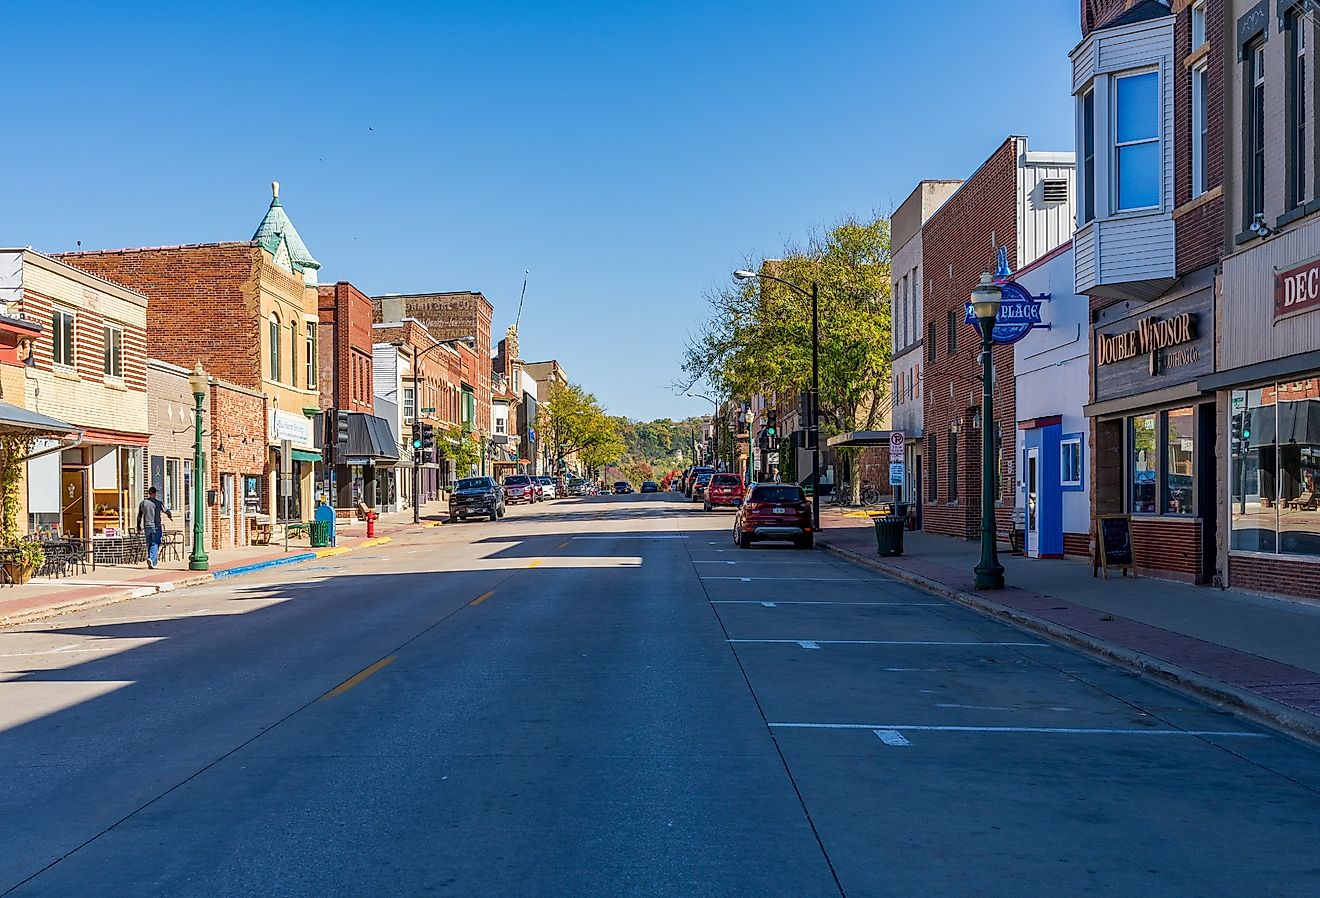 Shops and stores on Water Street n Decorah, Iowa. Image credit Steve Heap